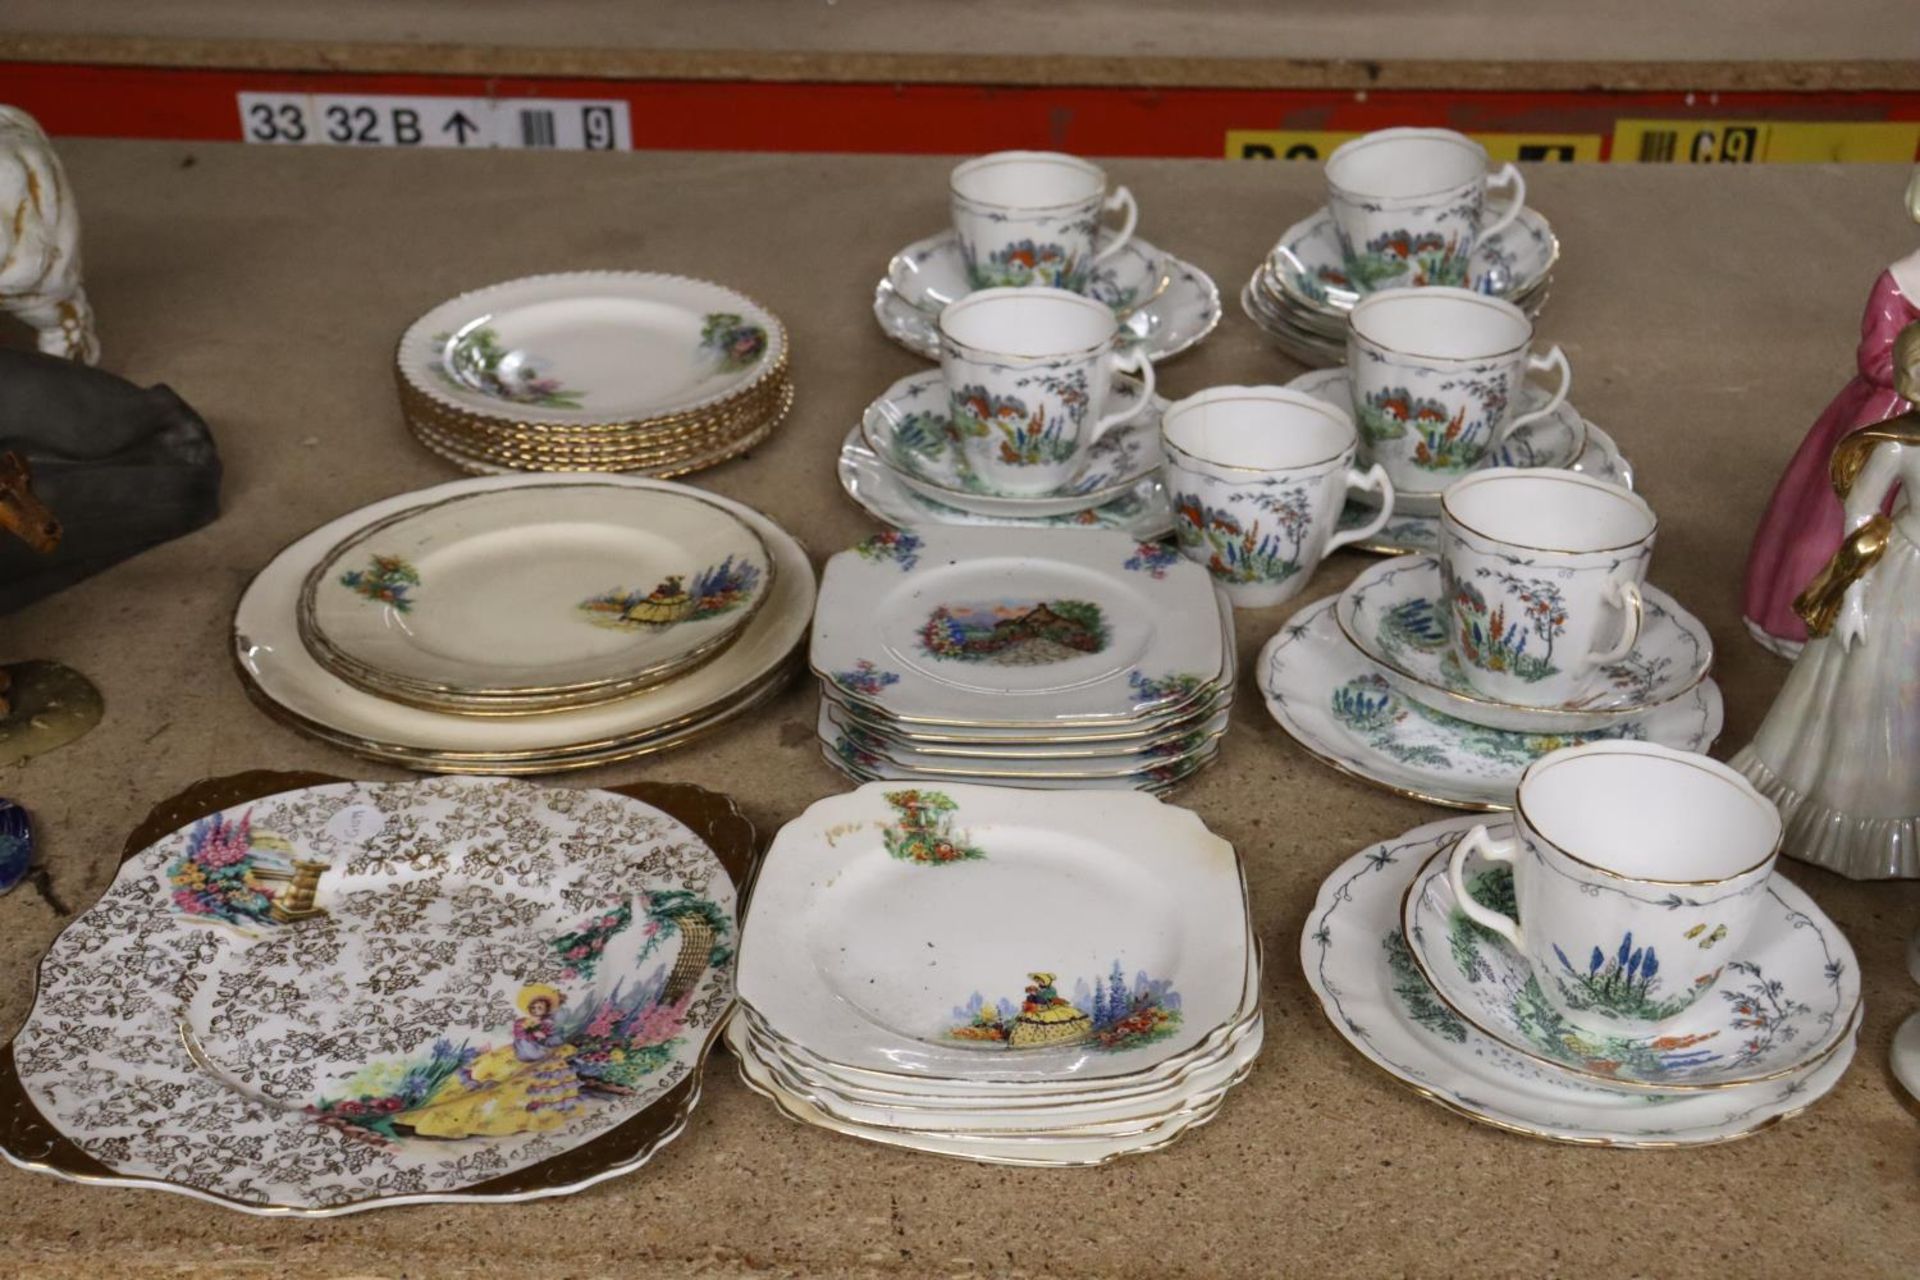 A QUANTITY OF VINTAGE CHINA CUPS, SAUCERS AND PLATES